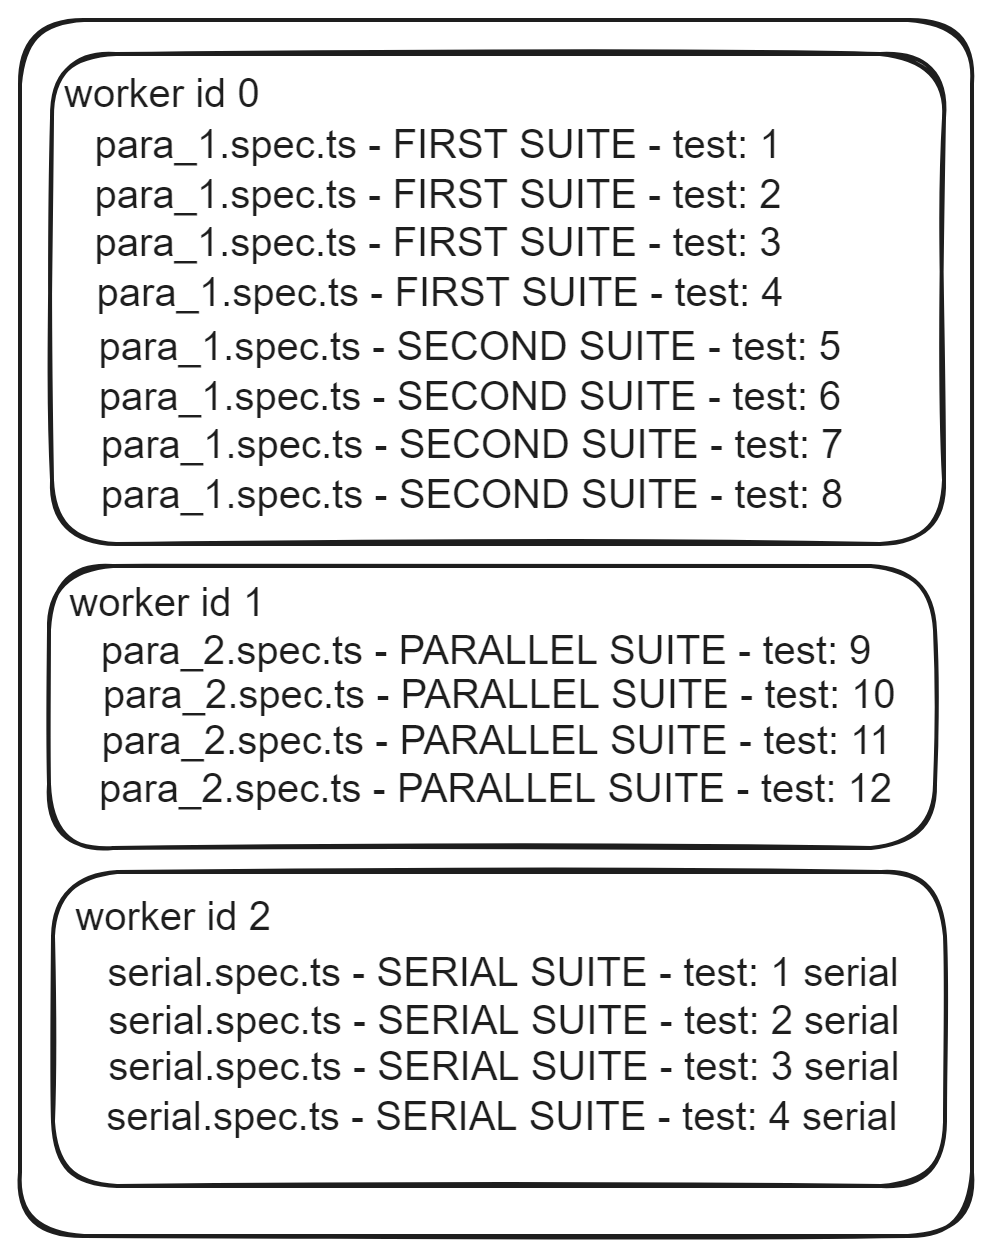 Full parallelization in Playwright